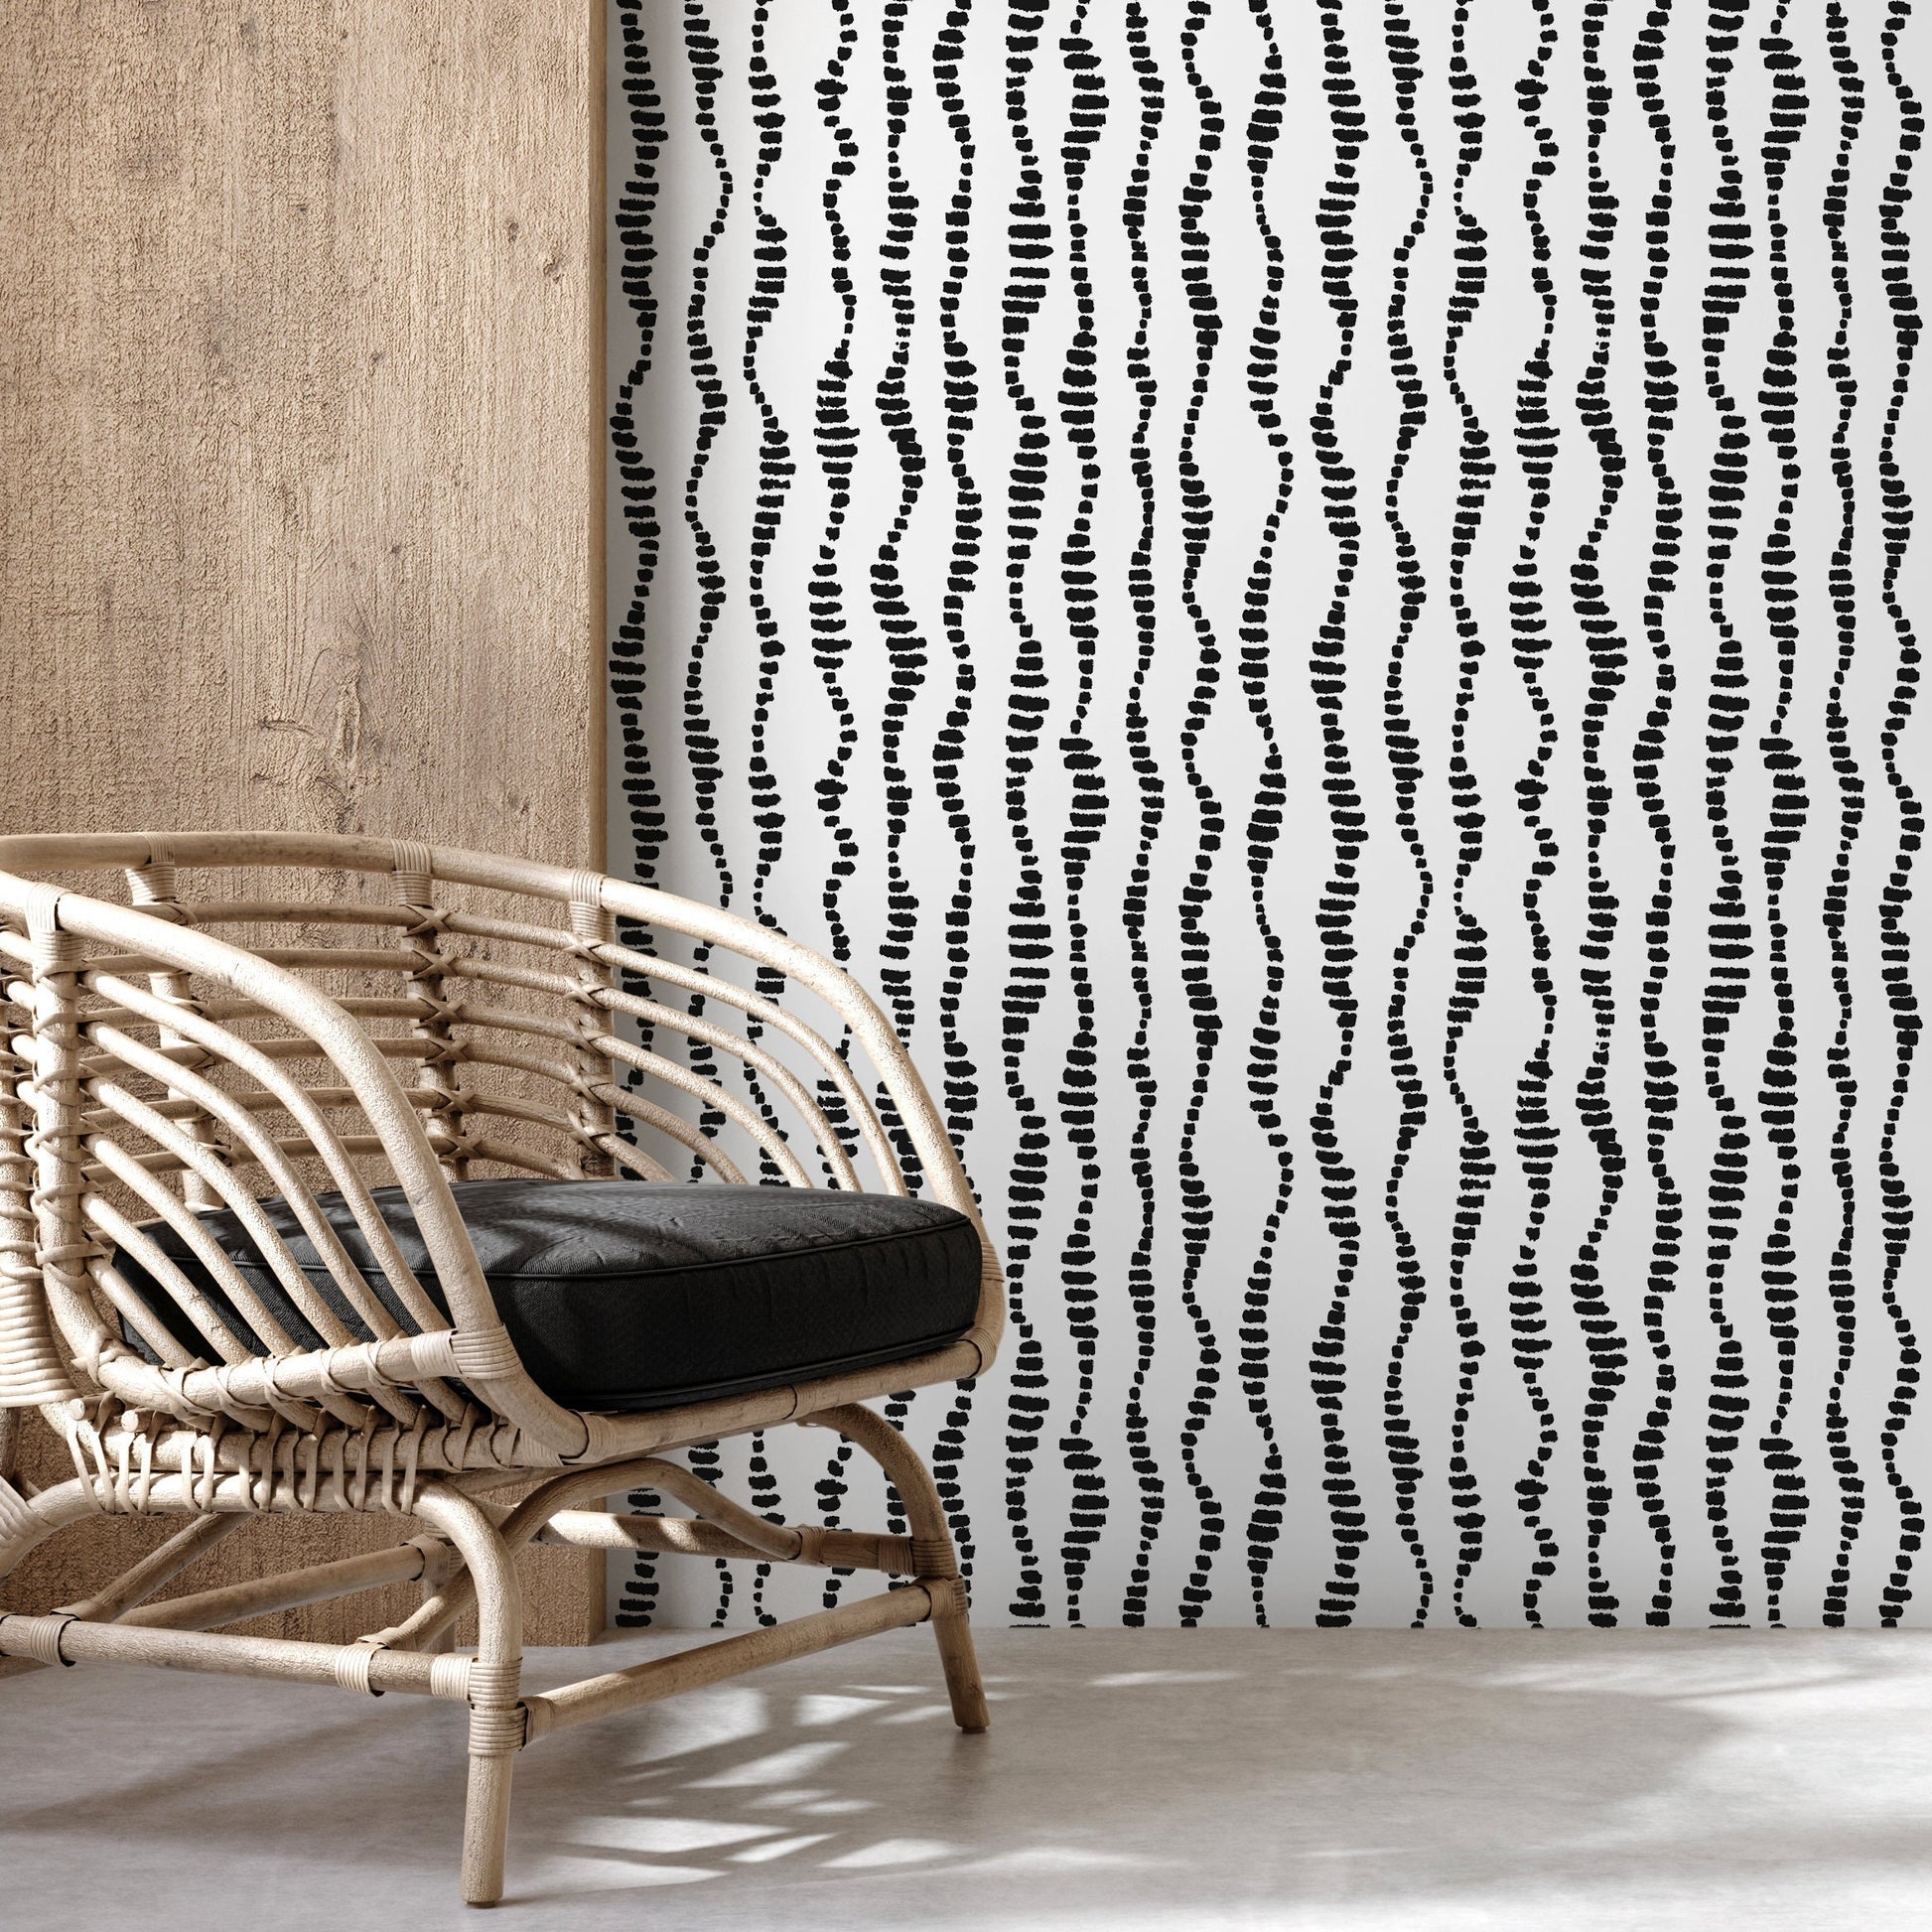 Wallpaper Peel and Stick Wallpaper Removable Wallpaper Home Decor Wall Art Wall Decor Room Decor / Black and White Boho Wallpaper - C535